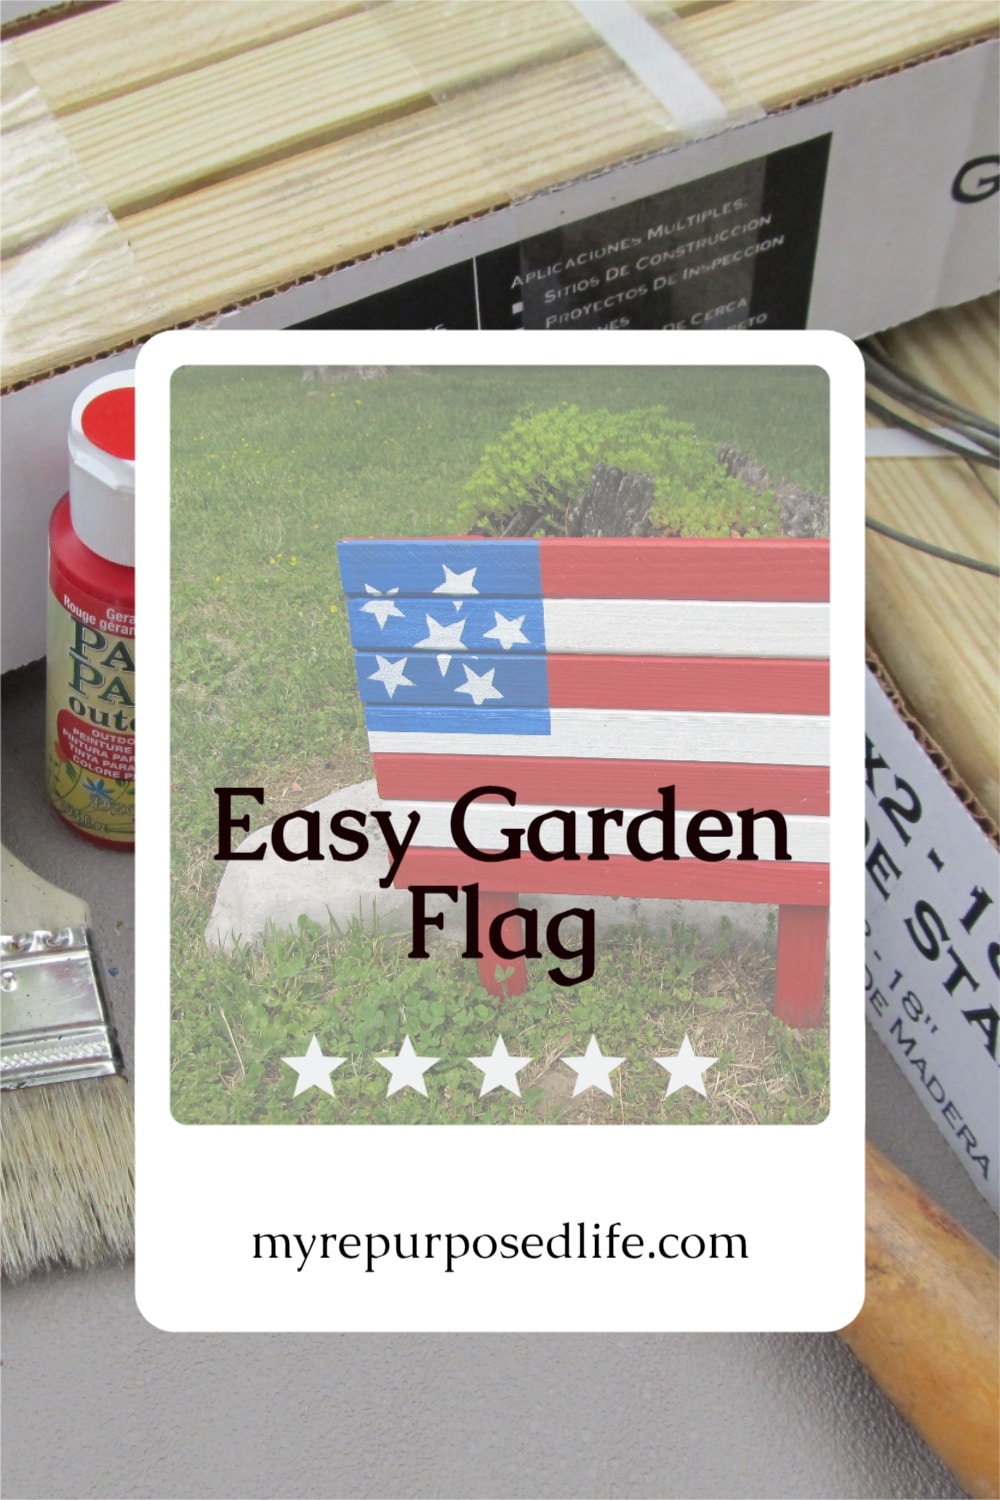 How to make an easy wooden Americana flag for your patio or flower garden. This flag is a quick and easy project using small garden stakes. Great afternoon project to make with the kids for a patriotic holiday celebration. #repurposed #MyRepurposedLife #4thofjuly #patriotic #flag #garden #decor via @repurposedlife